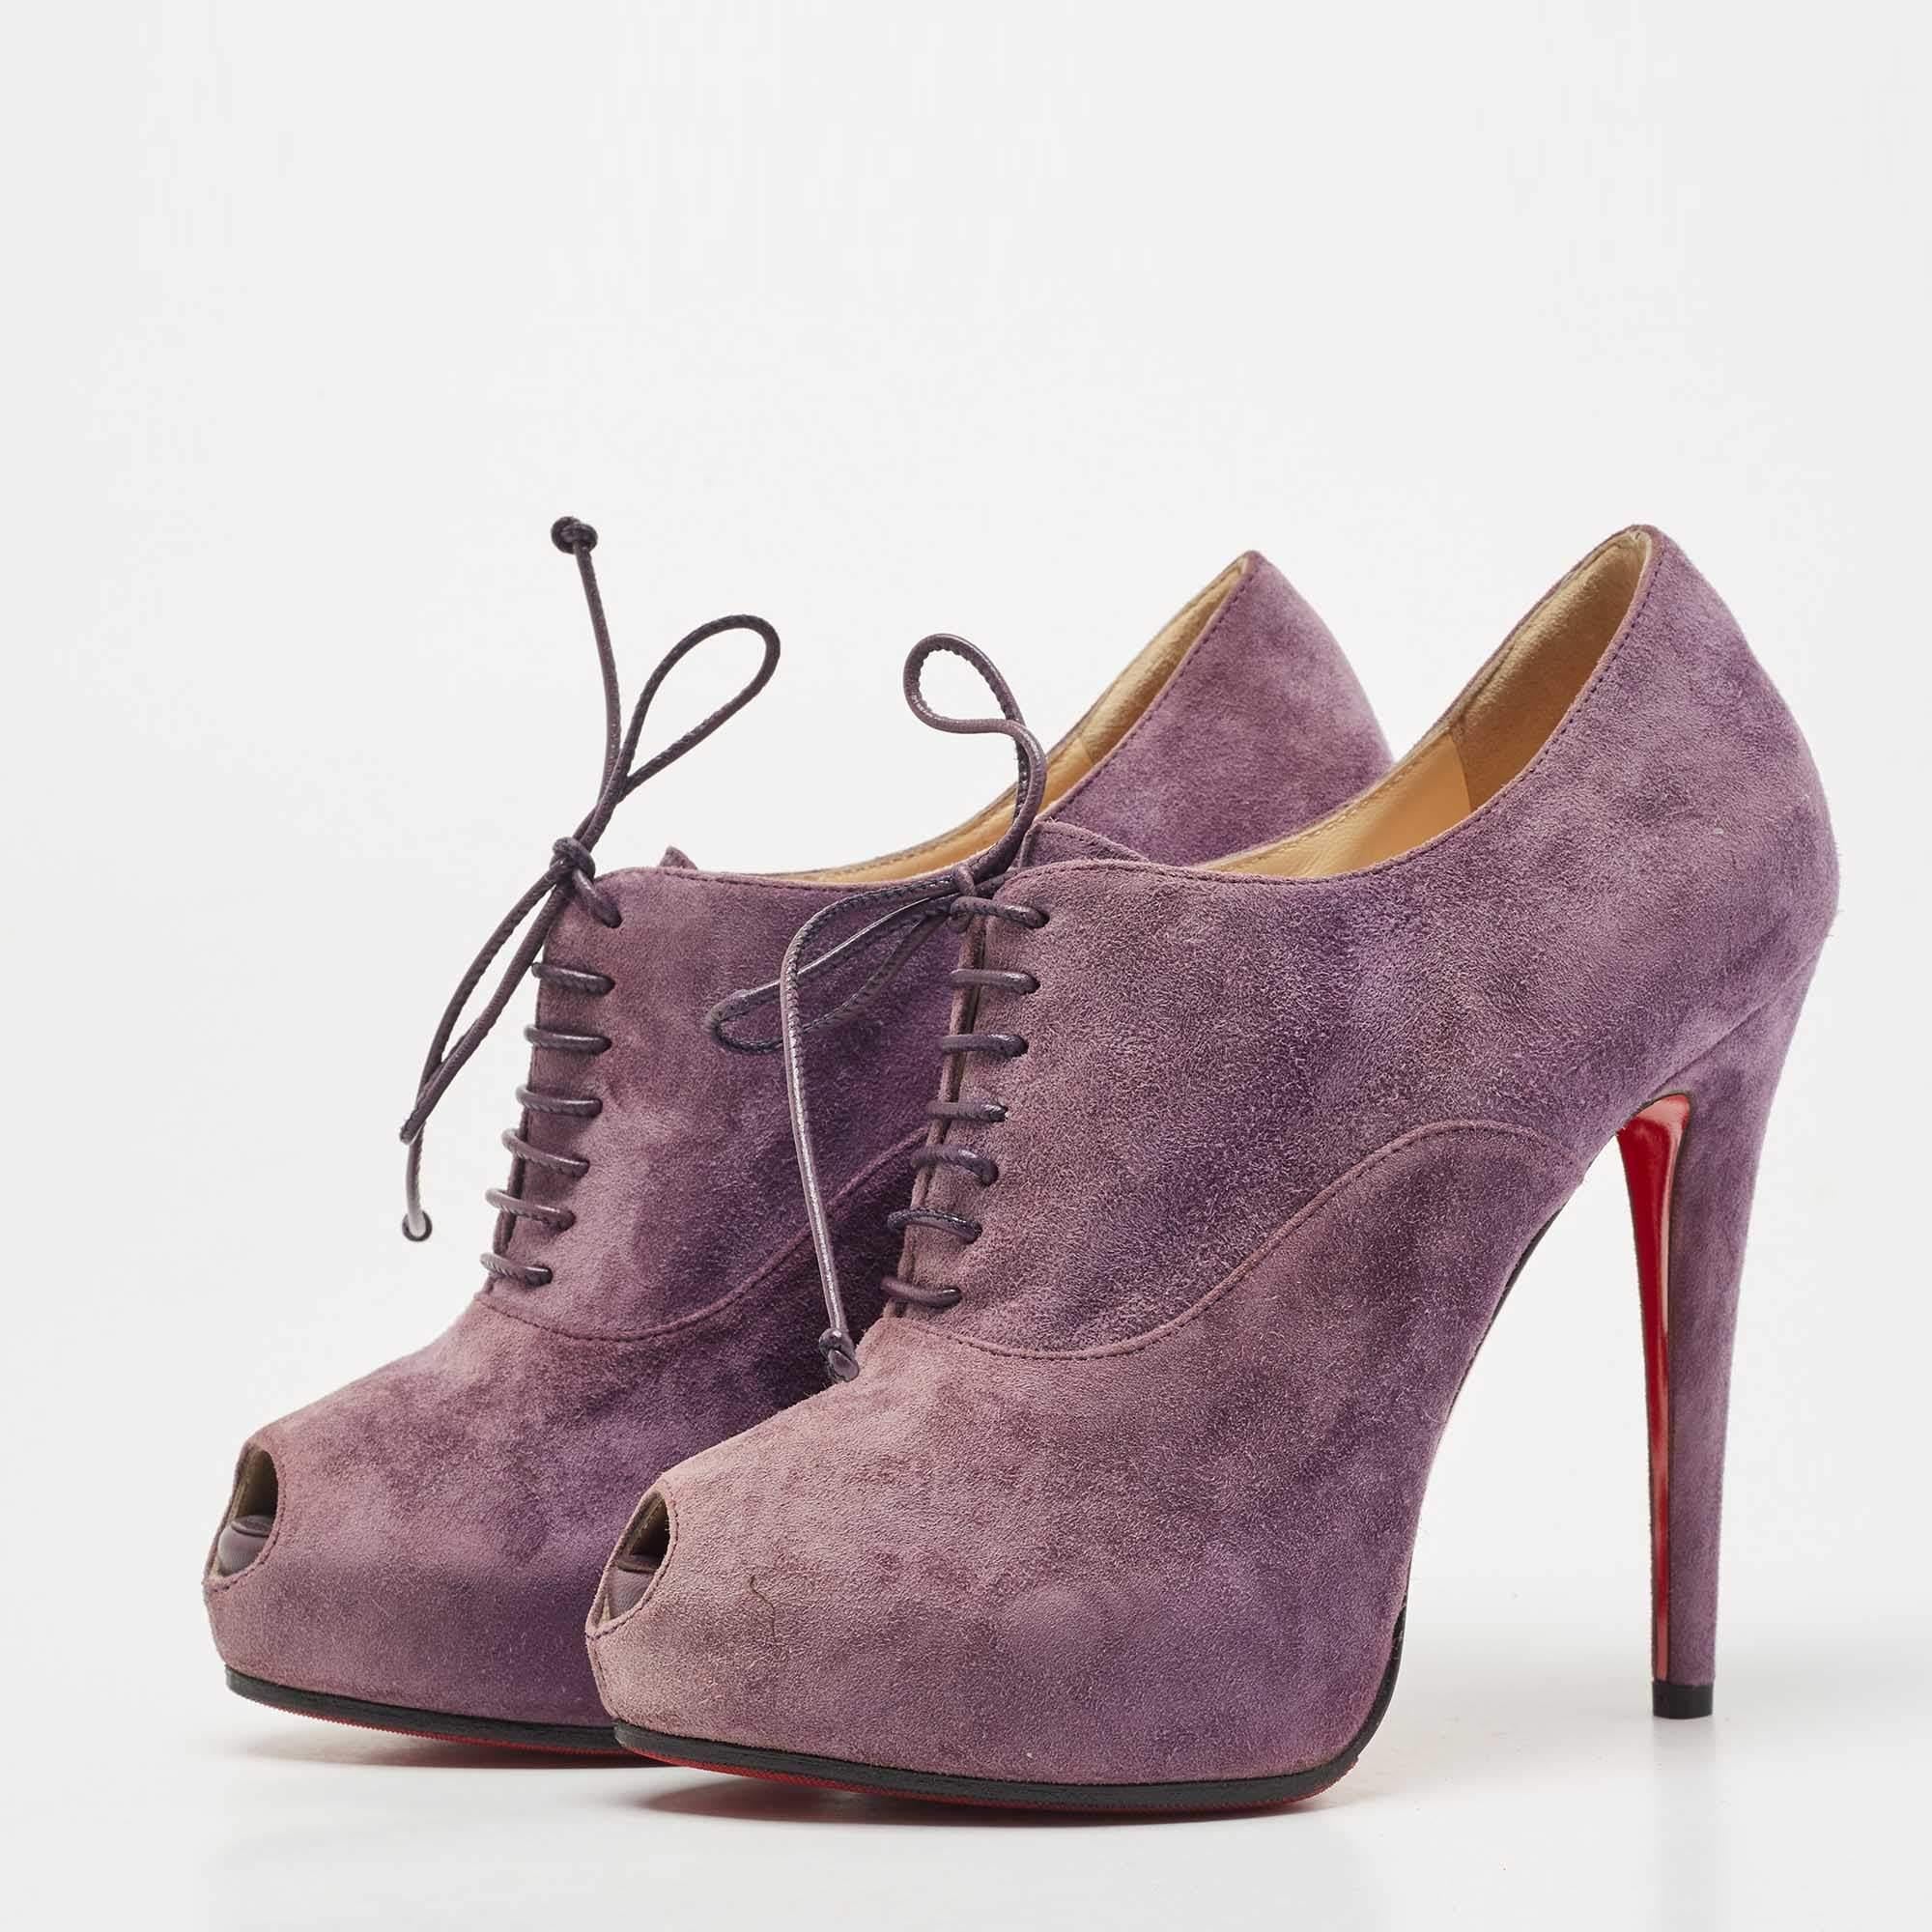 Made from high-quality purple suede, they feature a peep-toe design and lace-up detailing. With their sleek silhouette and signature red sole, these Christian Louboutin booties add a touch of luxury and sophistication to any outfit.

